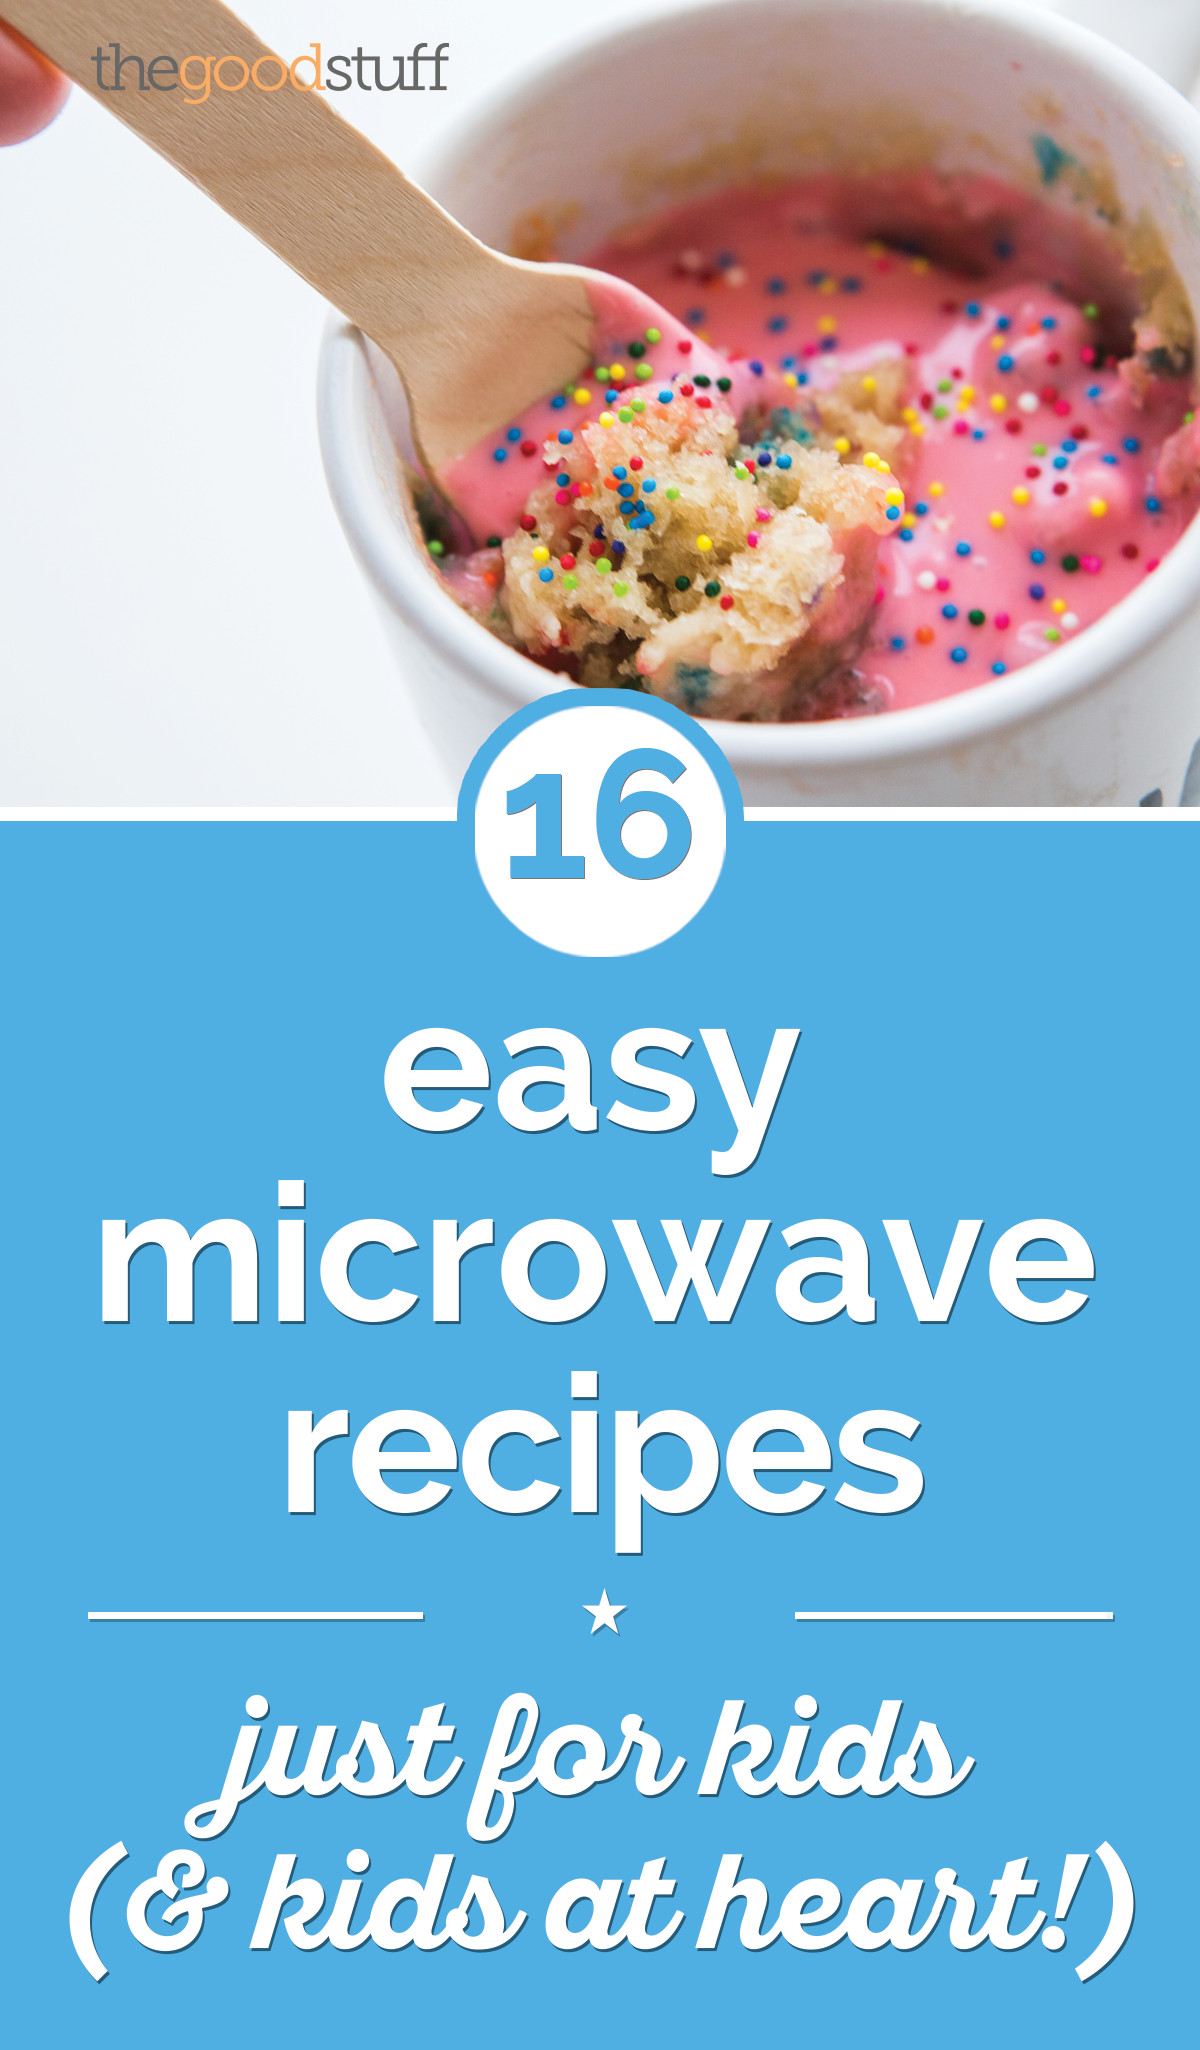 Microwave Snacks Recipes
 16 Easy Microwave Recipes Just for Kids & Kids at Heart